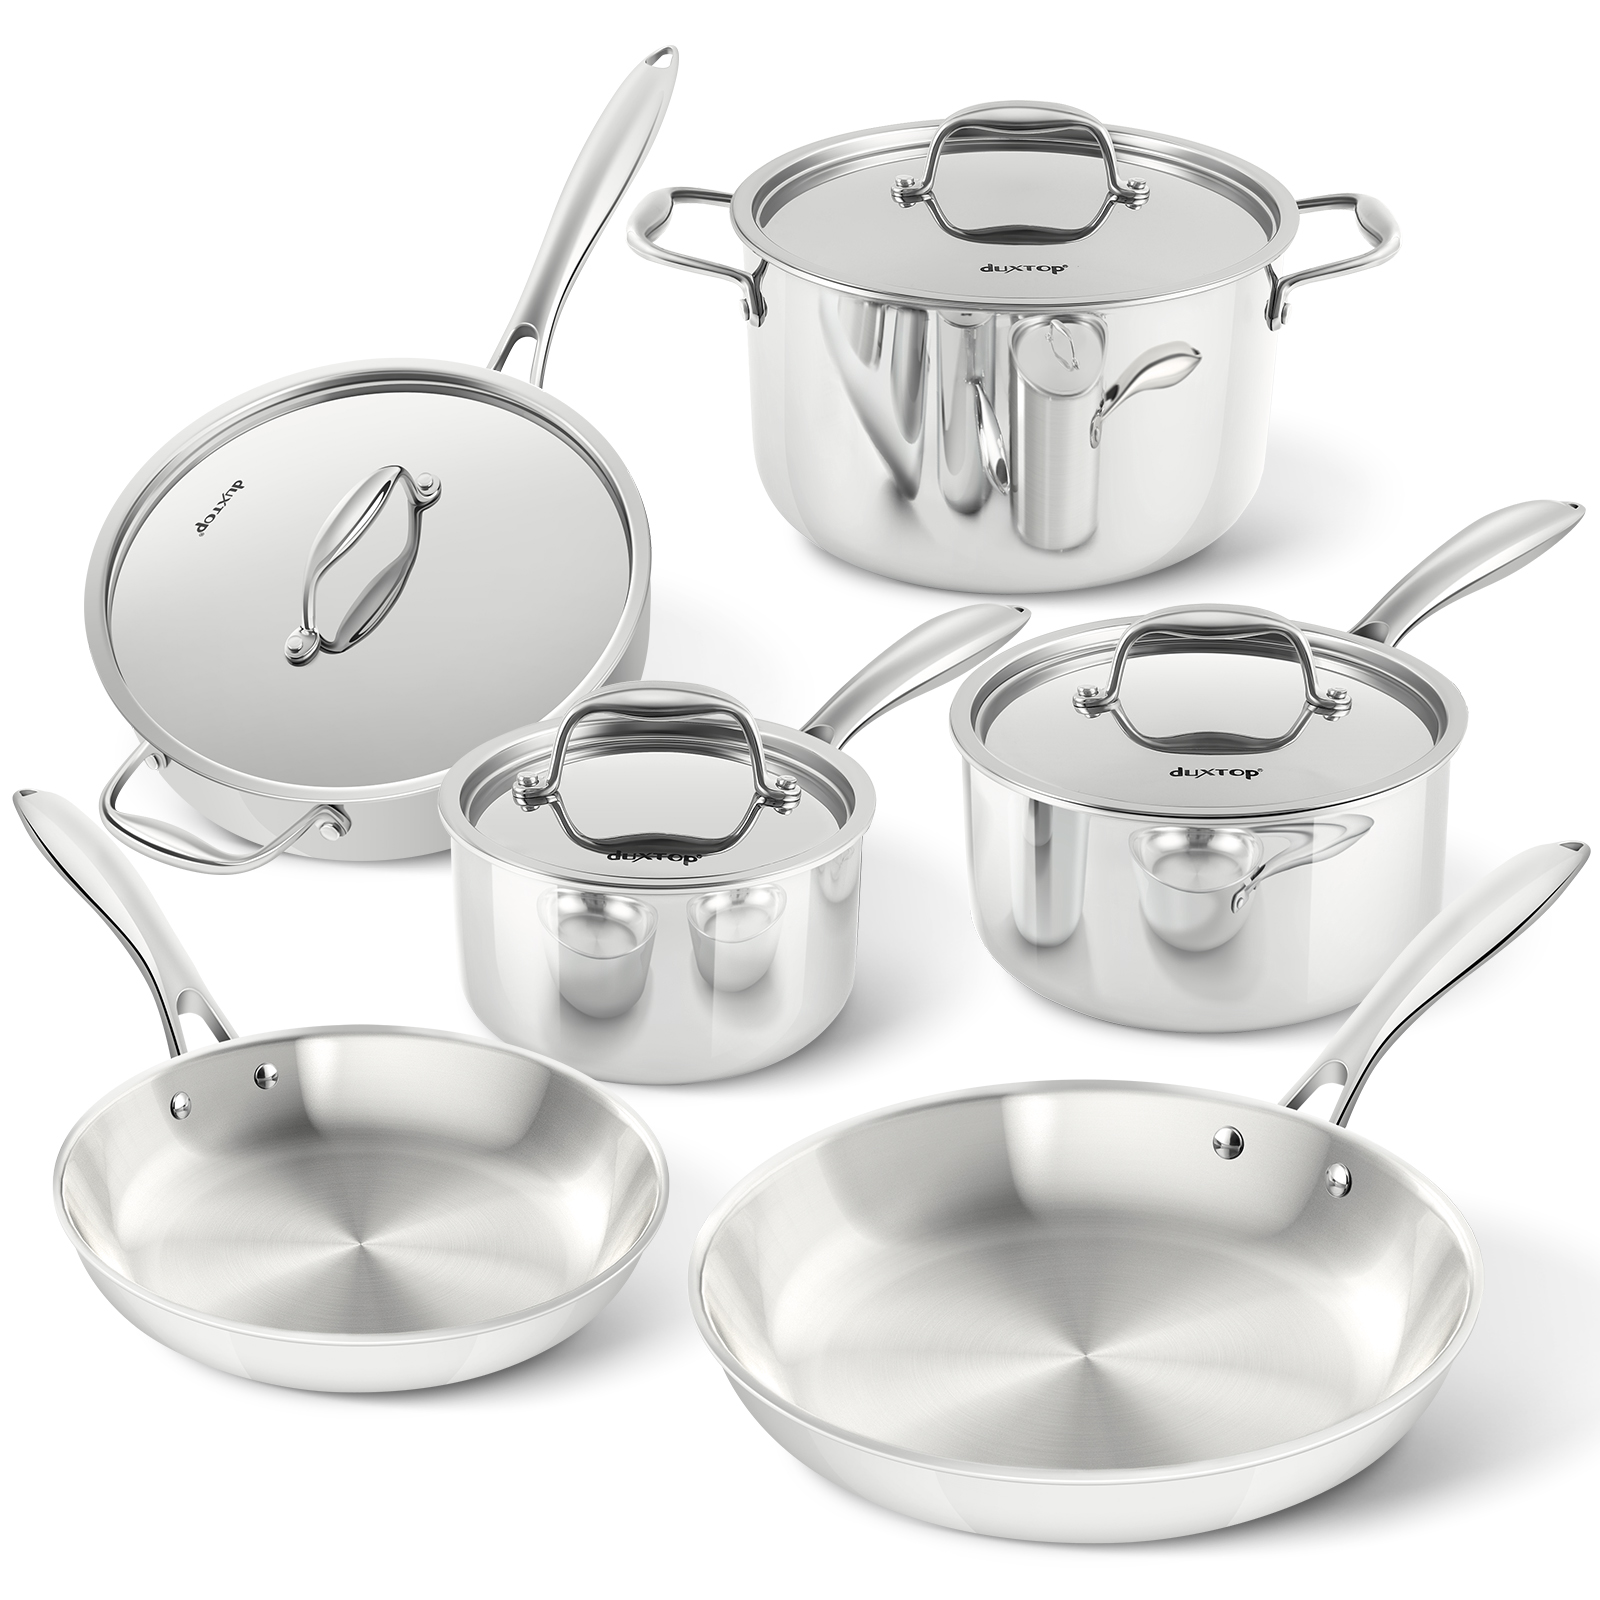 Duxtop 10PC Kitchen Pots and Pans Set, Whole-Clad Tri-Ply Stainless Steel  Induction Cookware Set - The Secura